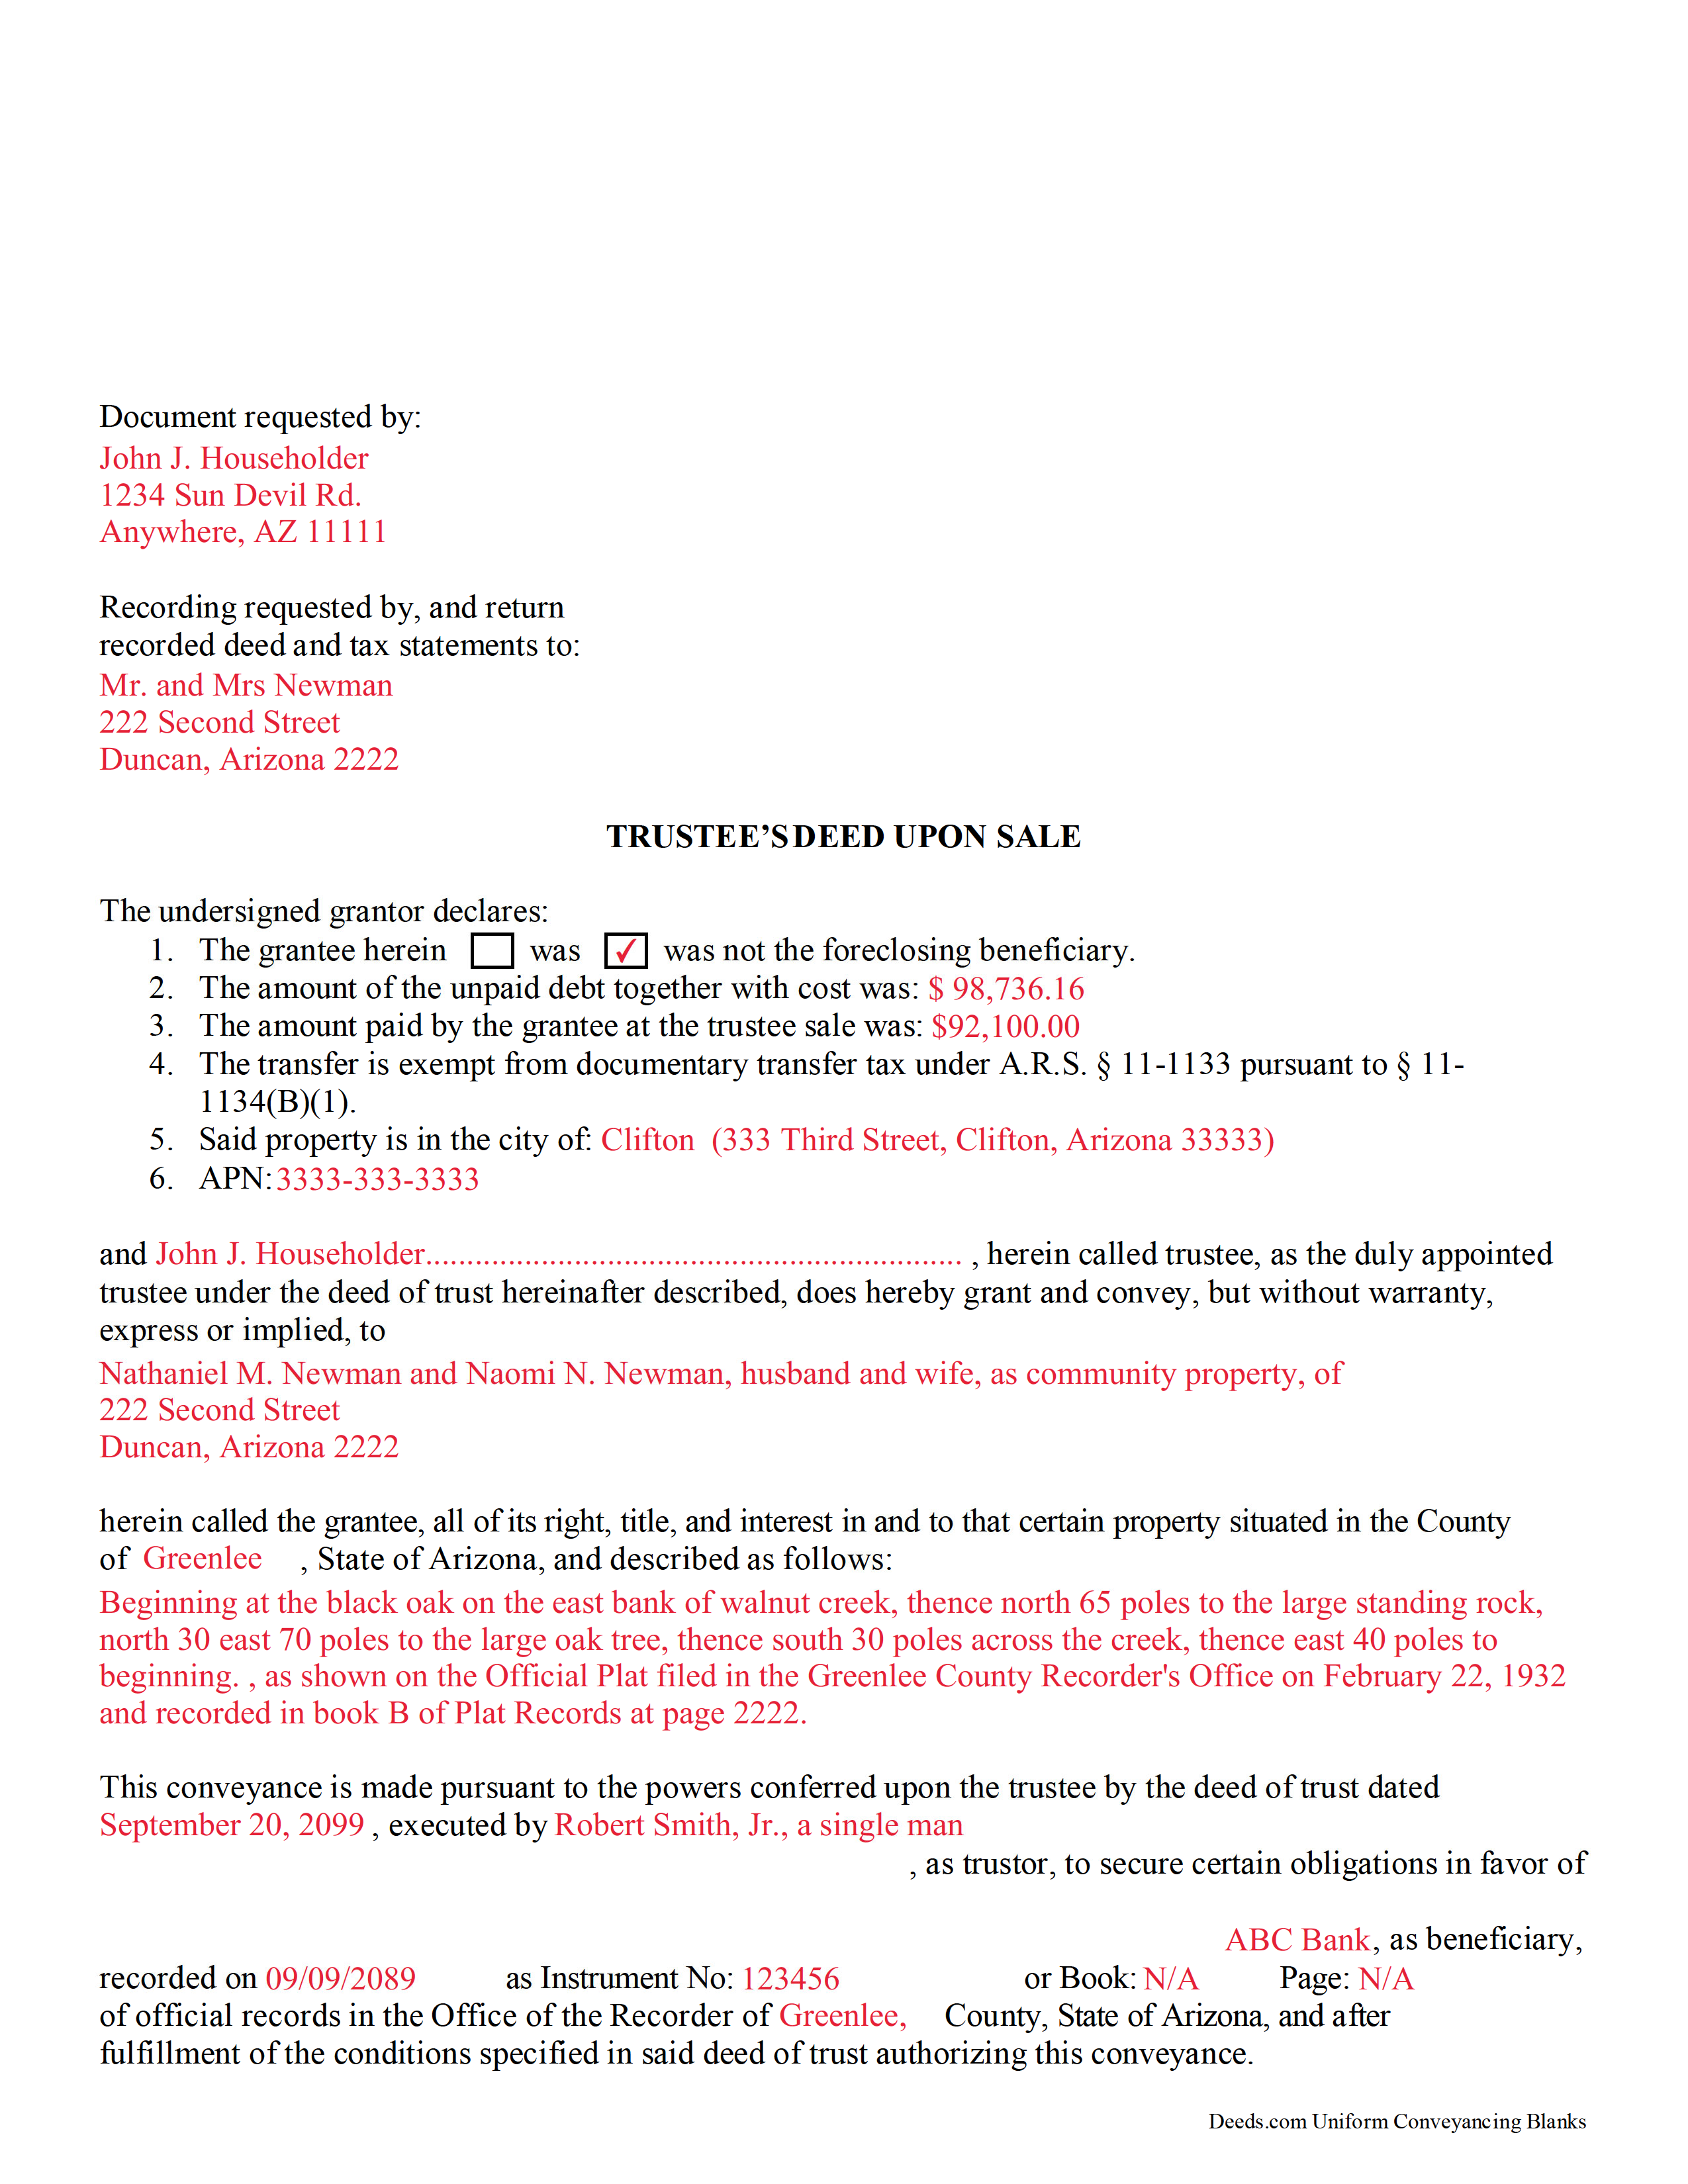 Completed Example of the Trustee Deed Document